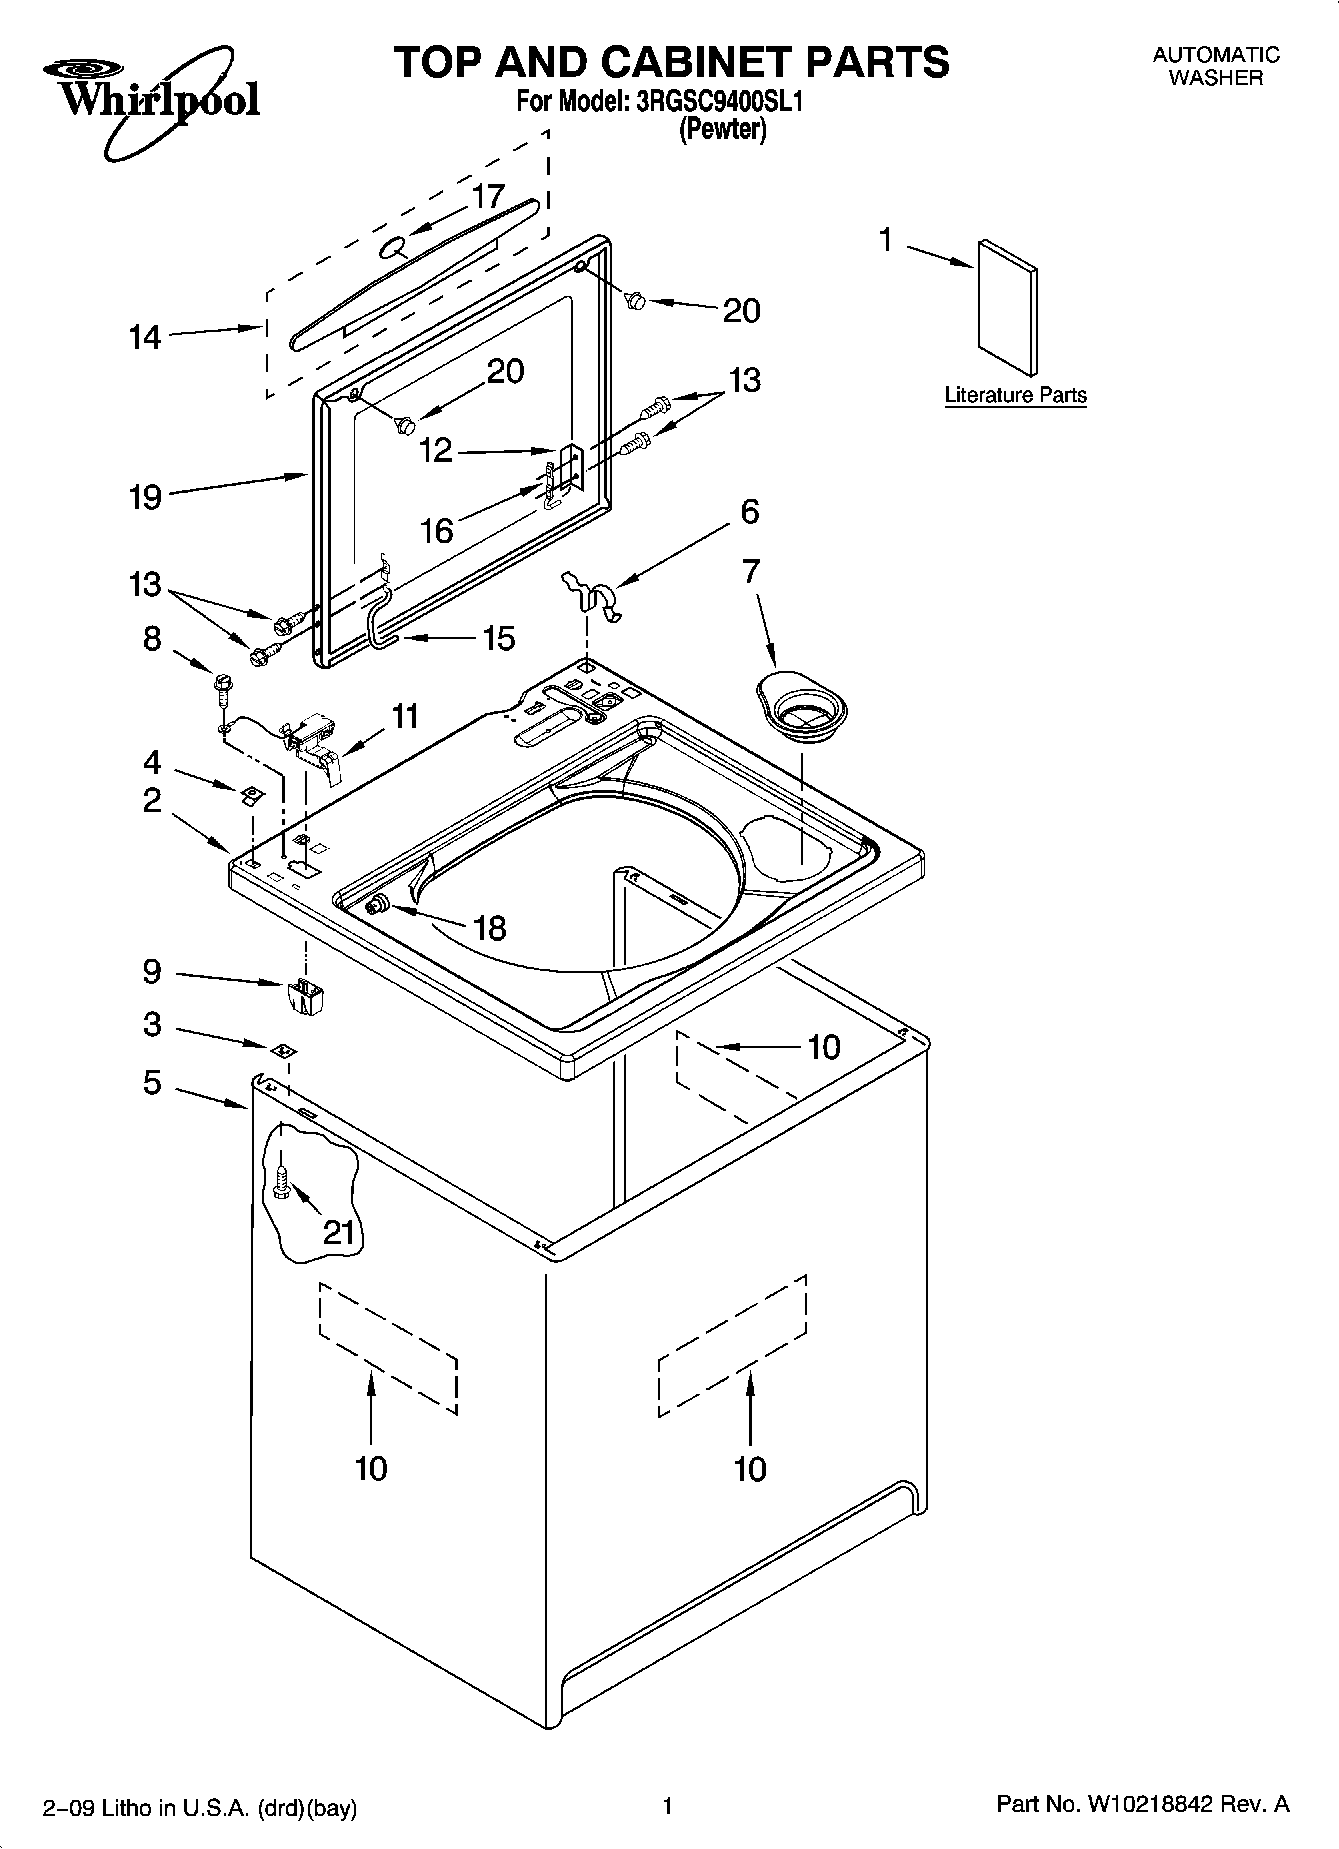 01 - TOP AND CABINET PARTS